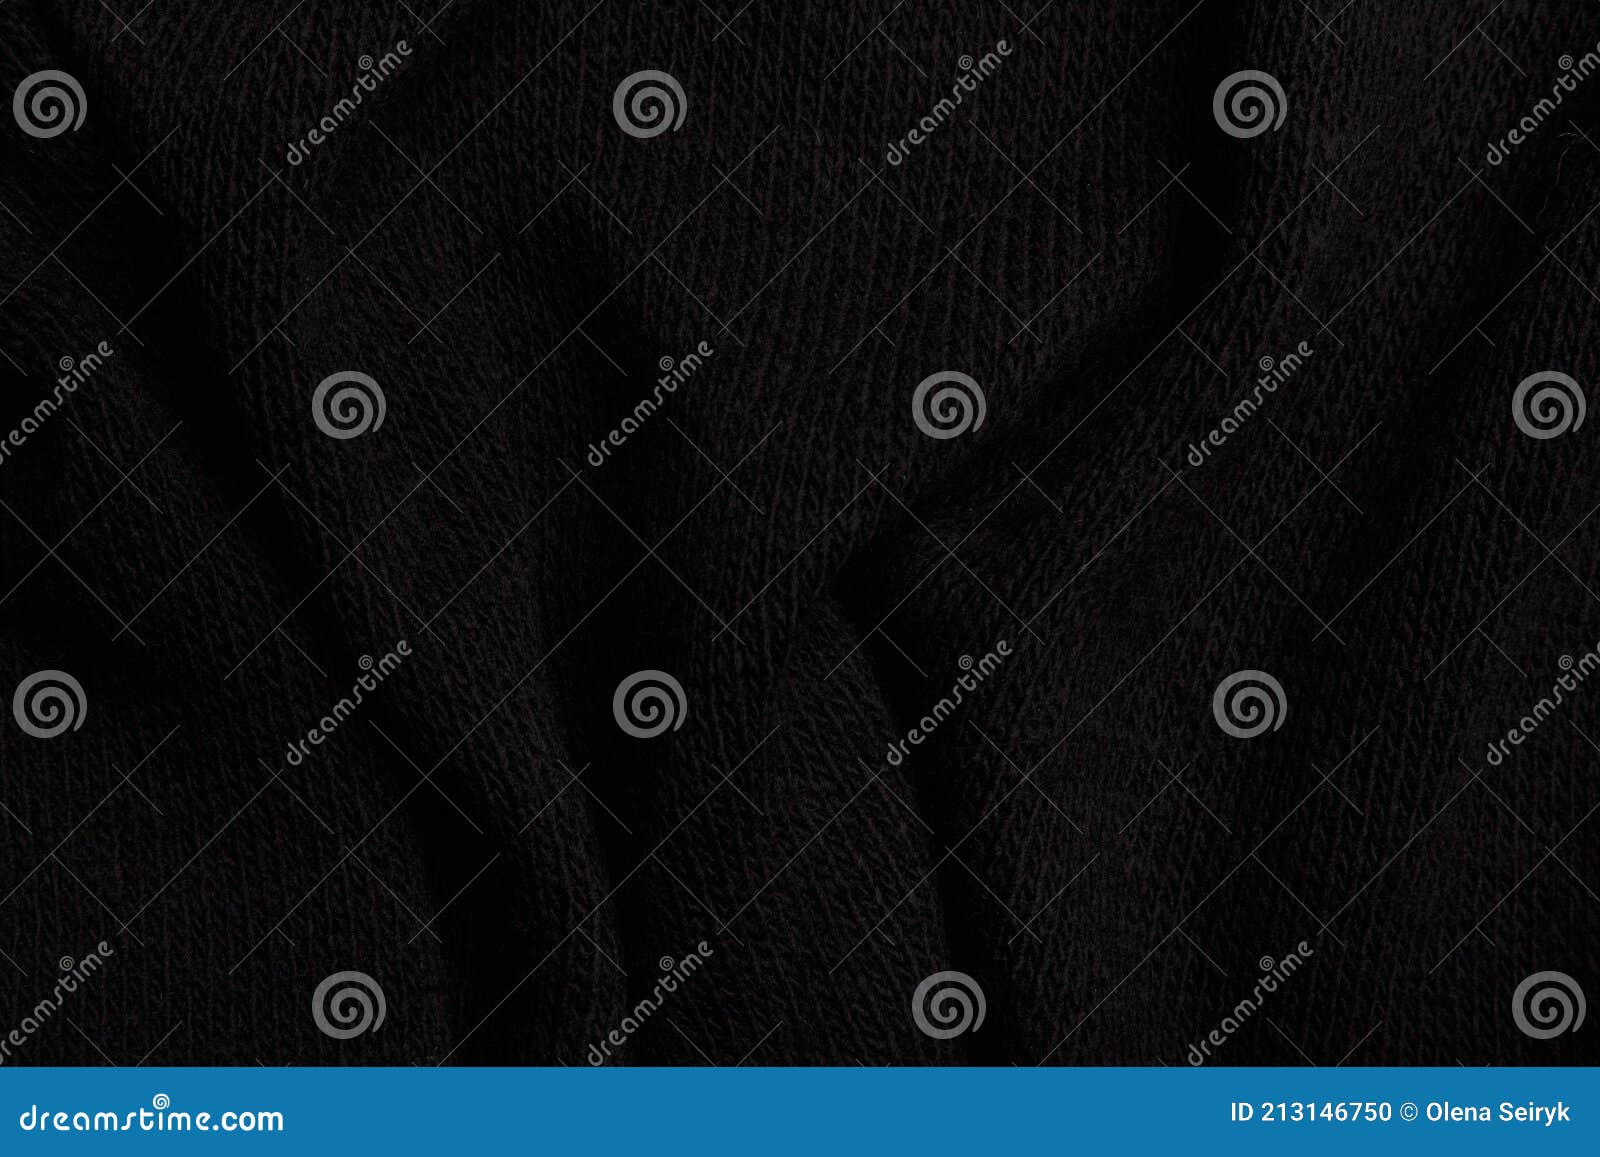 Wrinkled Black Knit Fabric Texture, Background or Backdrop. Stock Photo ...